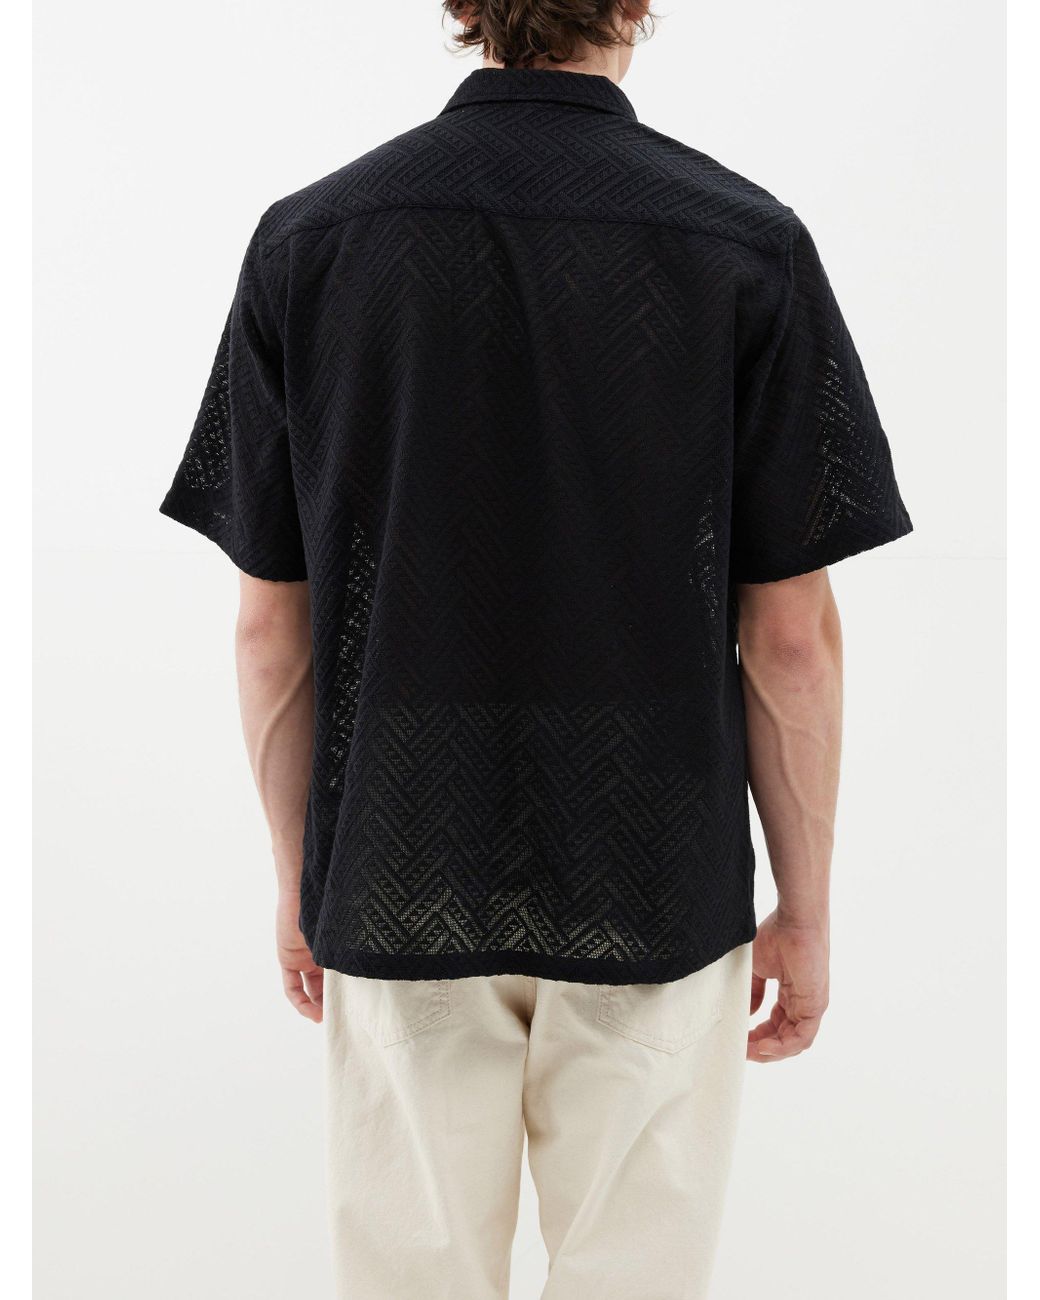 sunflower Spacey Jacquard Cotton-blend Knit Shirt in Black for Men